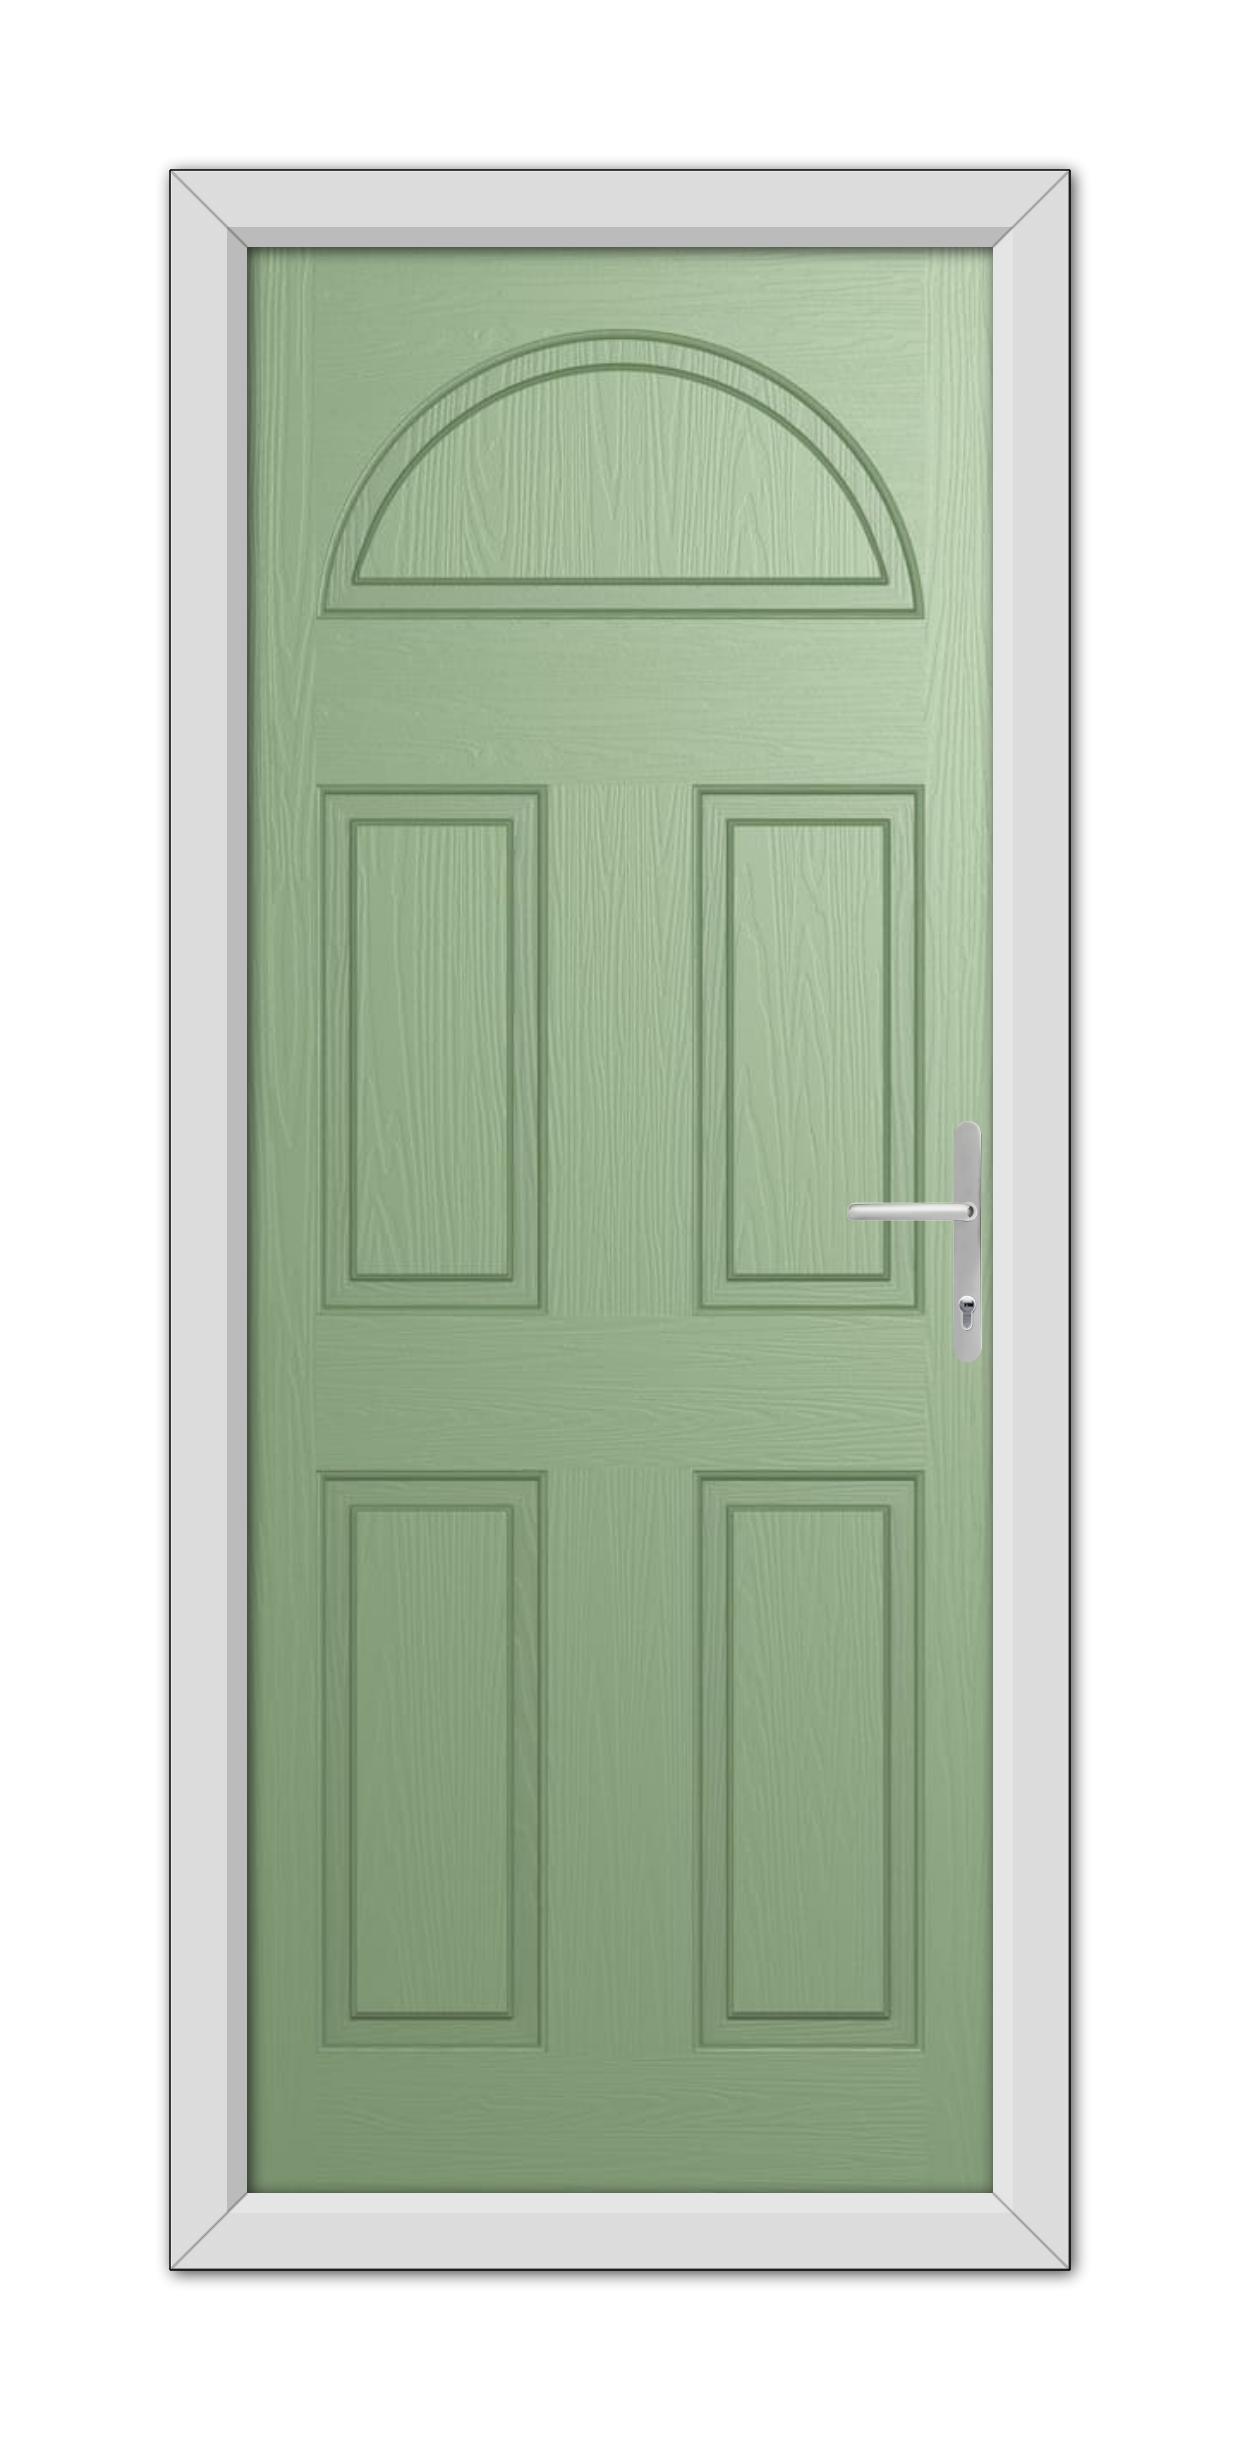 A Chartwell Green Winslow Solid Composite Door with six panels and an arched window at the top, framed in white, viewed head-on.